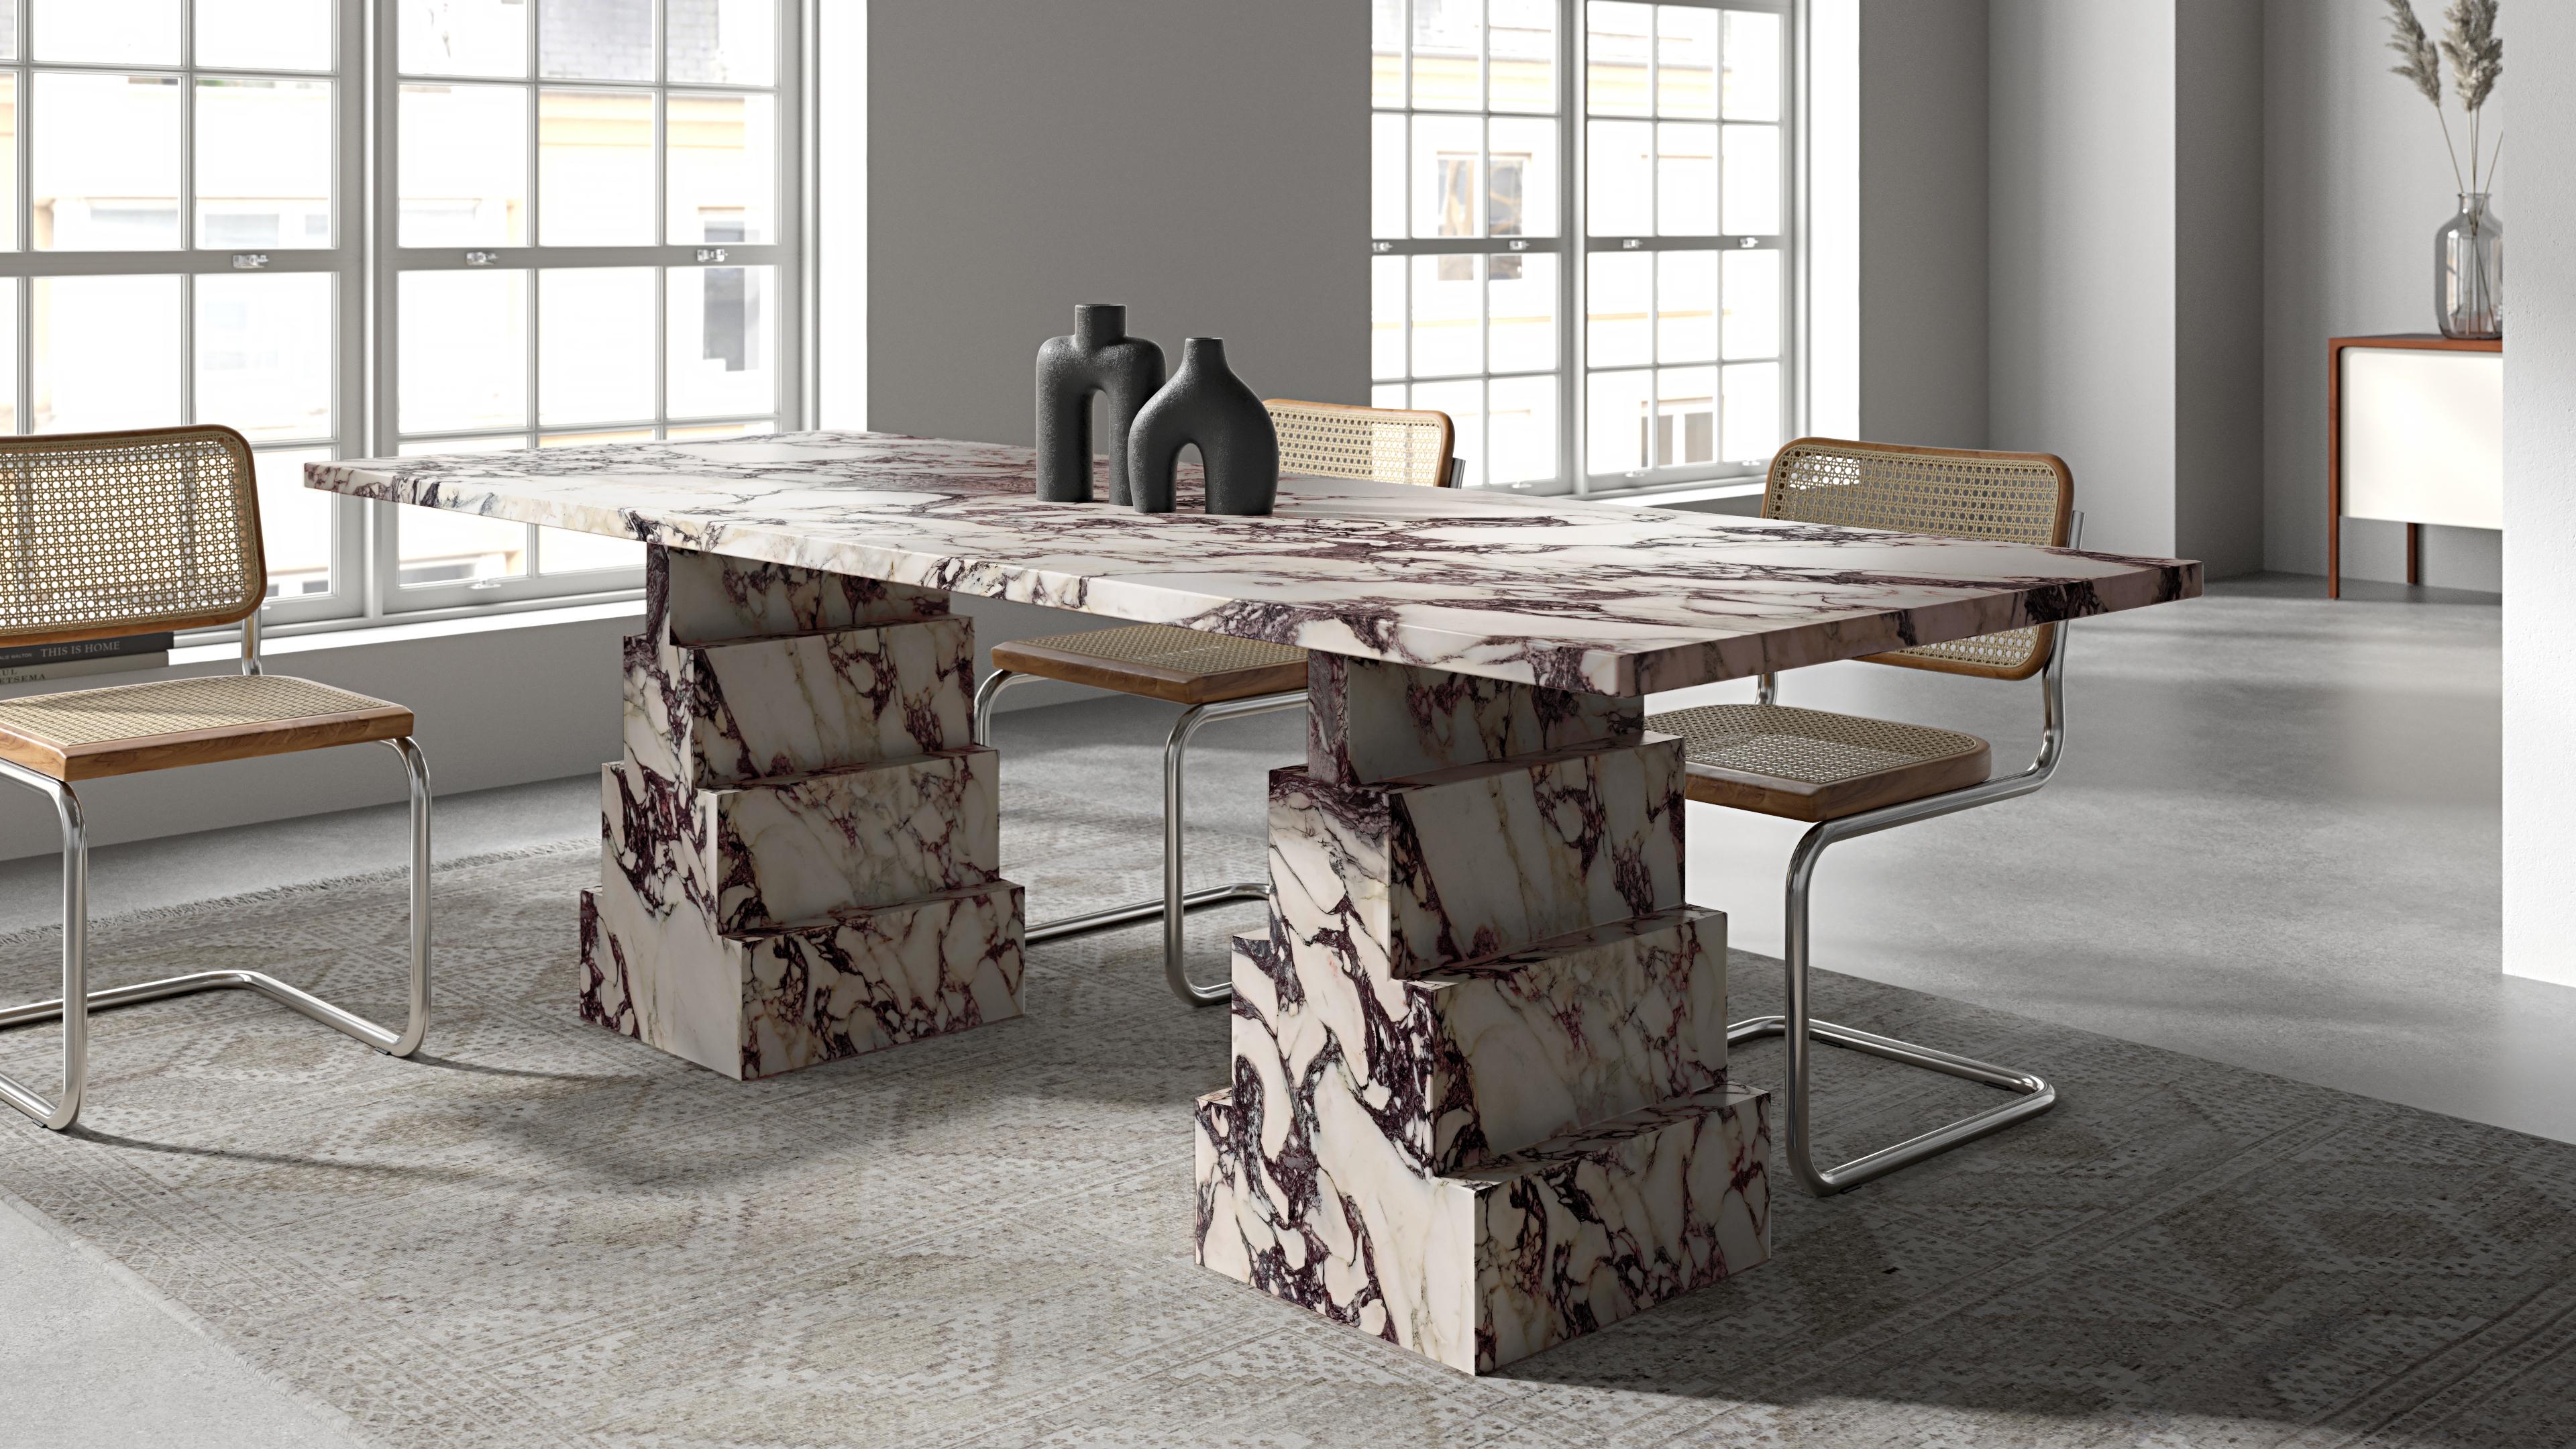 Hand-Crafted NORDST NIKO Dining Table, Italian Calacatta Marble, Danish Modern Design, New For Sale